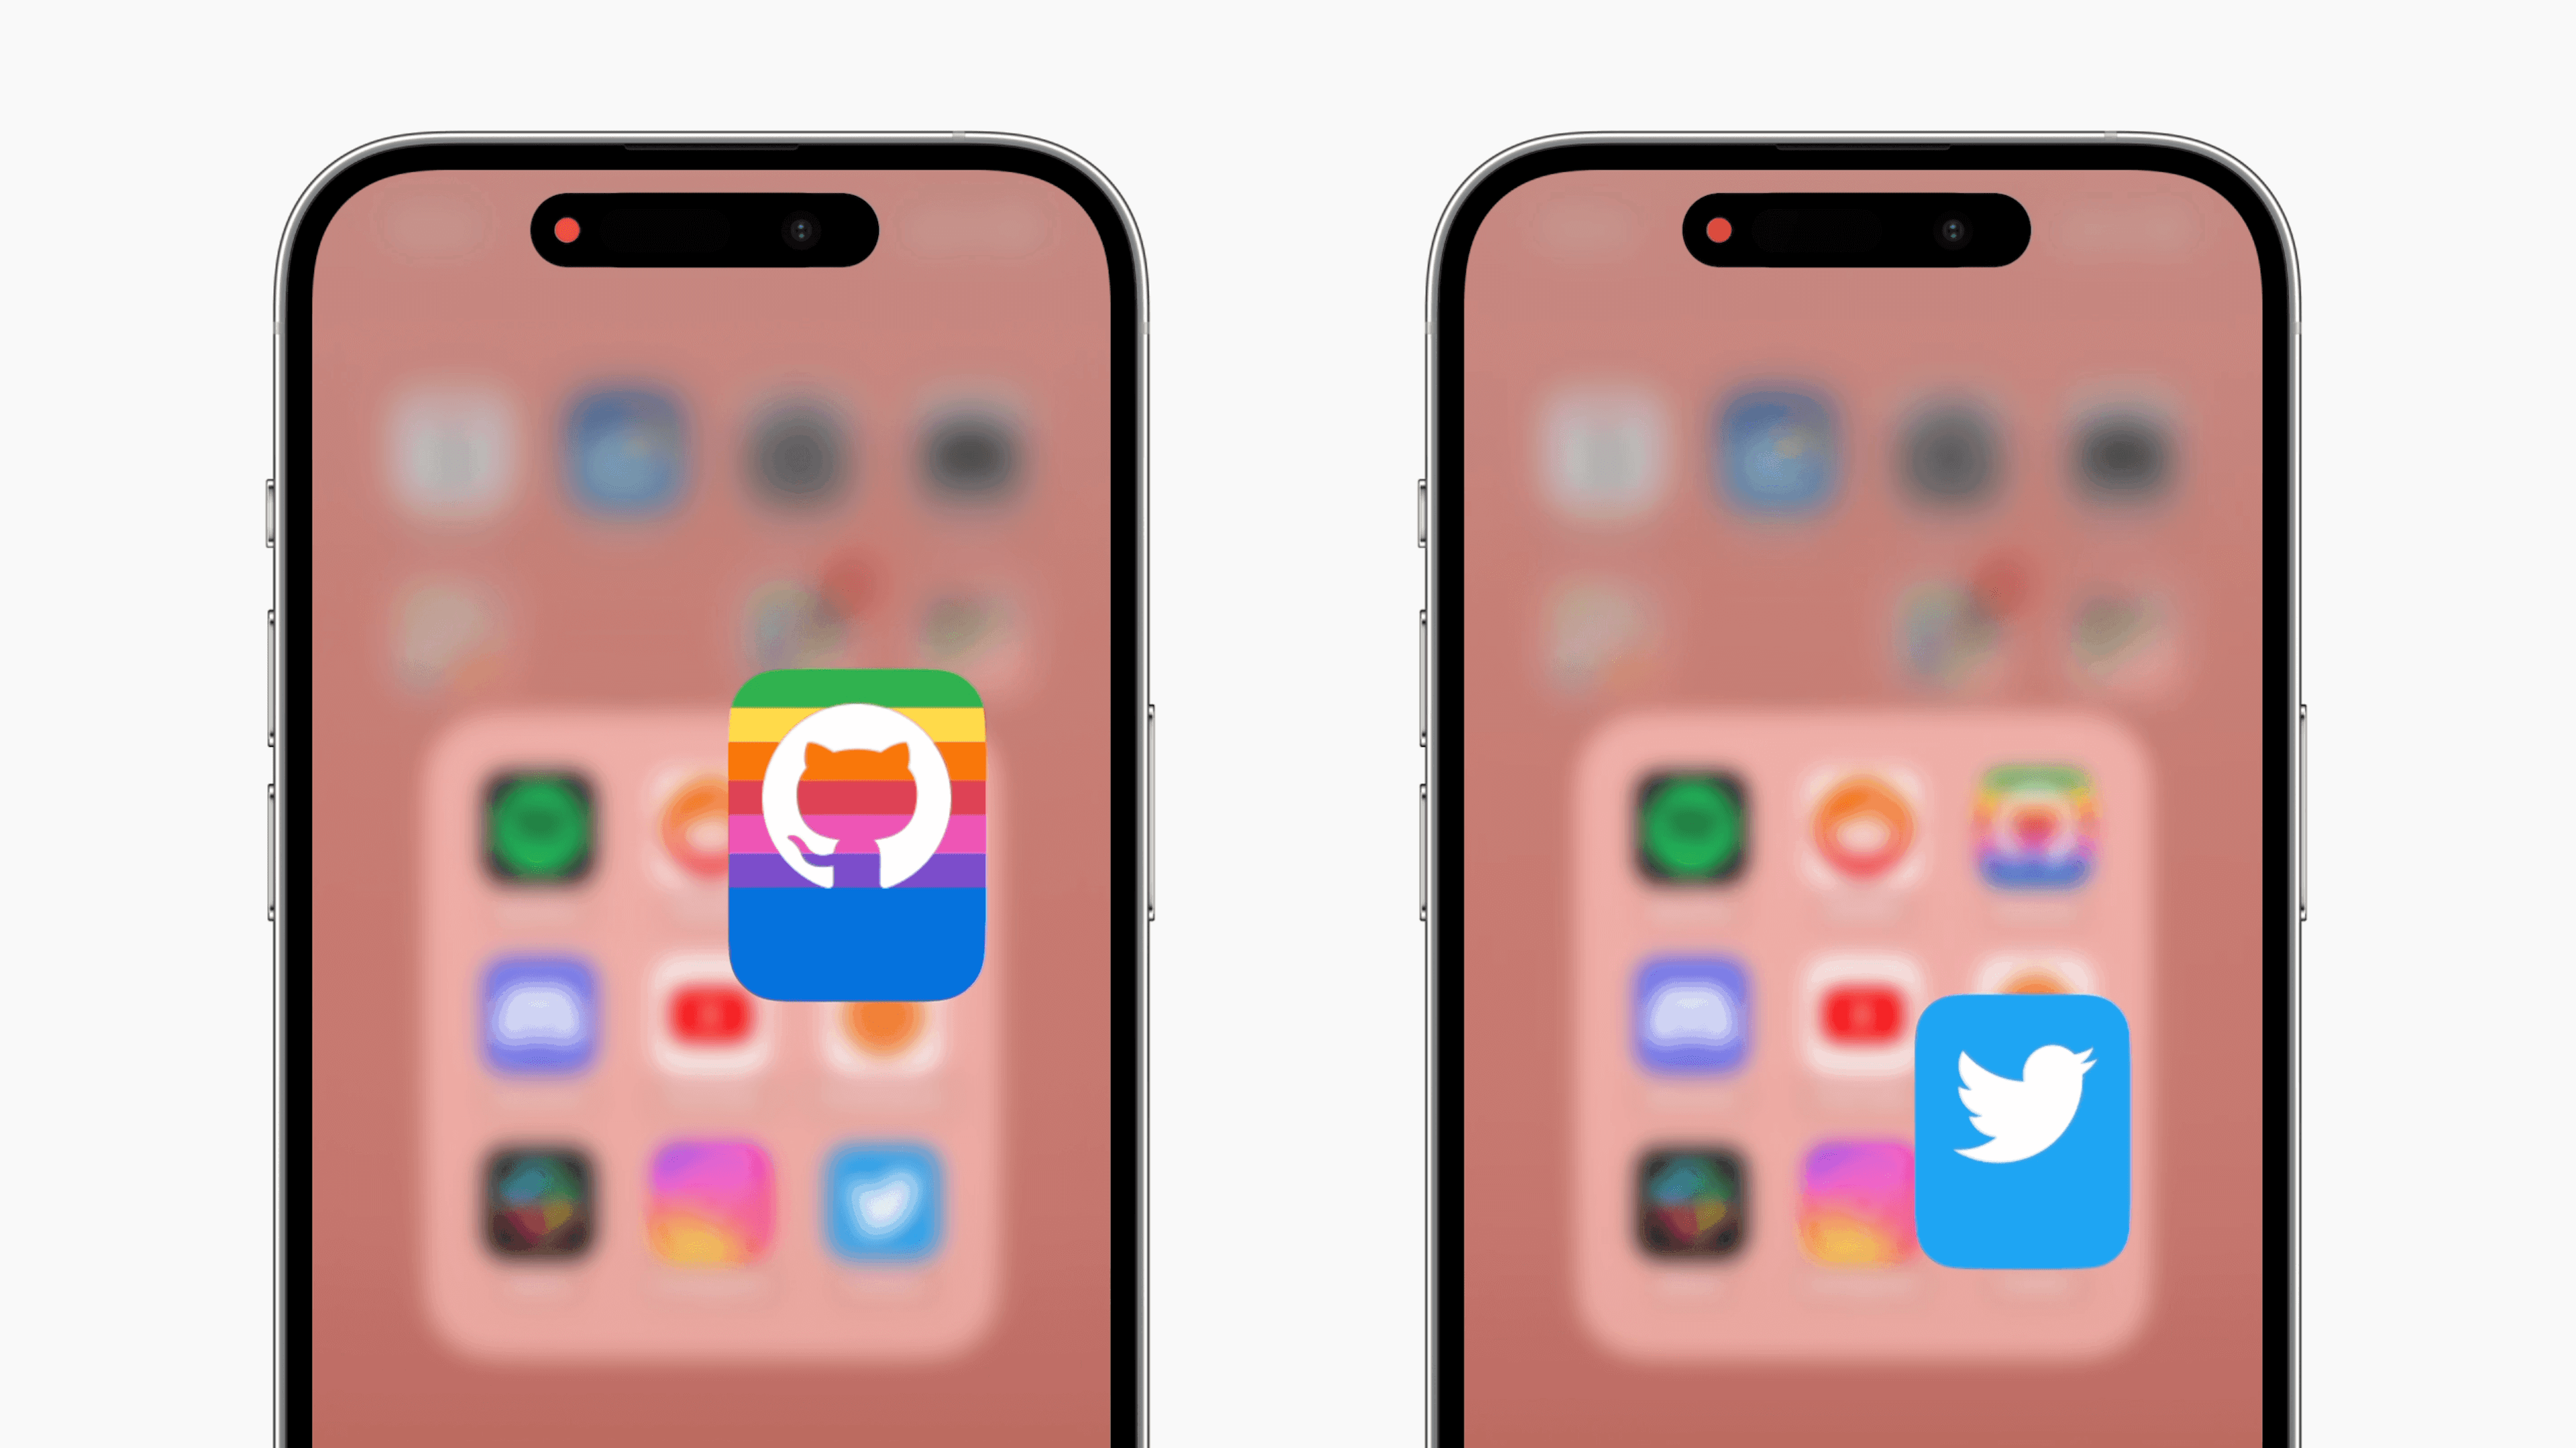 Two app icons are in focus, both of them have the bottom 10 points duplicated and stretched for an elongated effect.